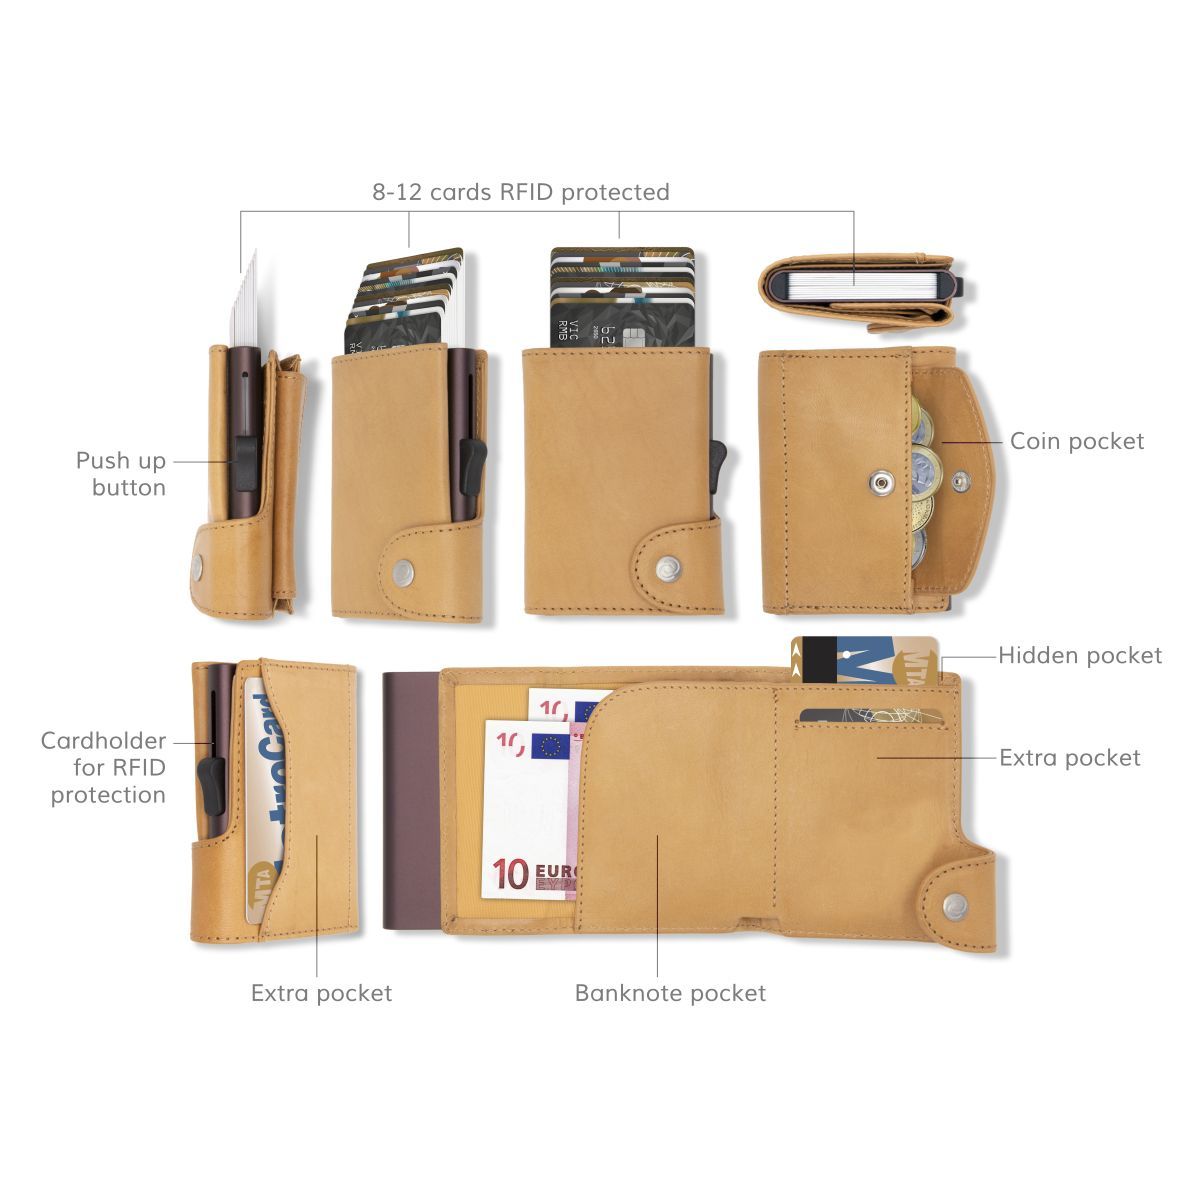 C-Secure XL Aluminum Wallet with Vegetable Genuine Leather and Coins Pocket - Brown Macchiato